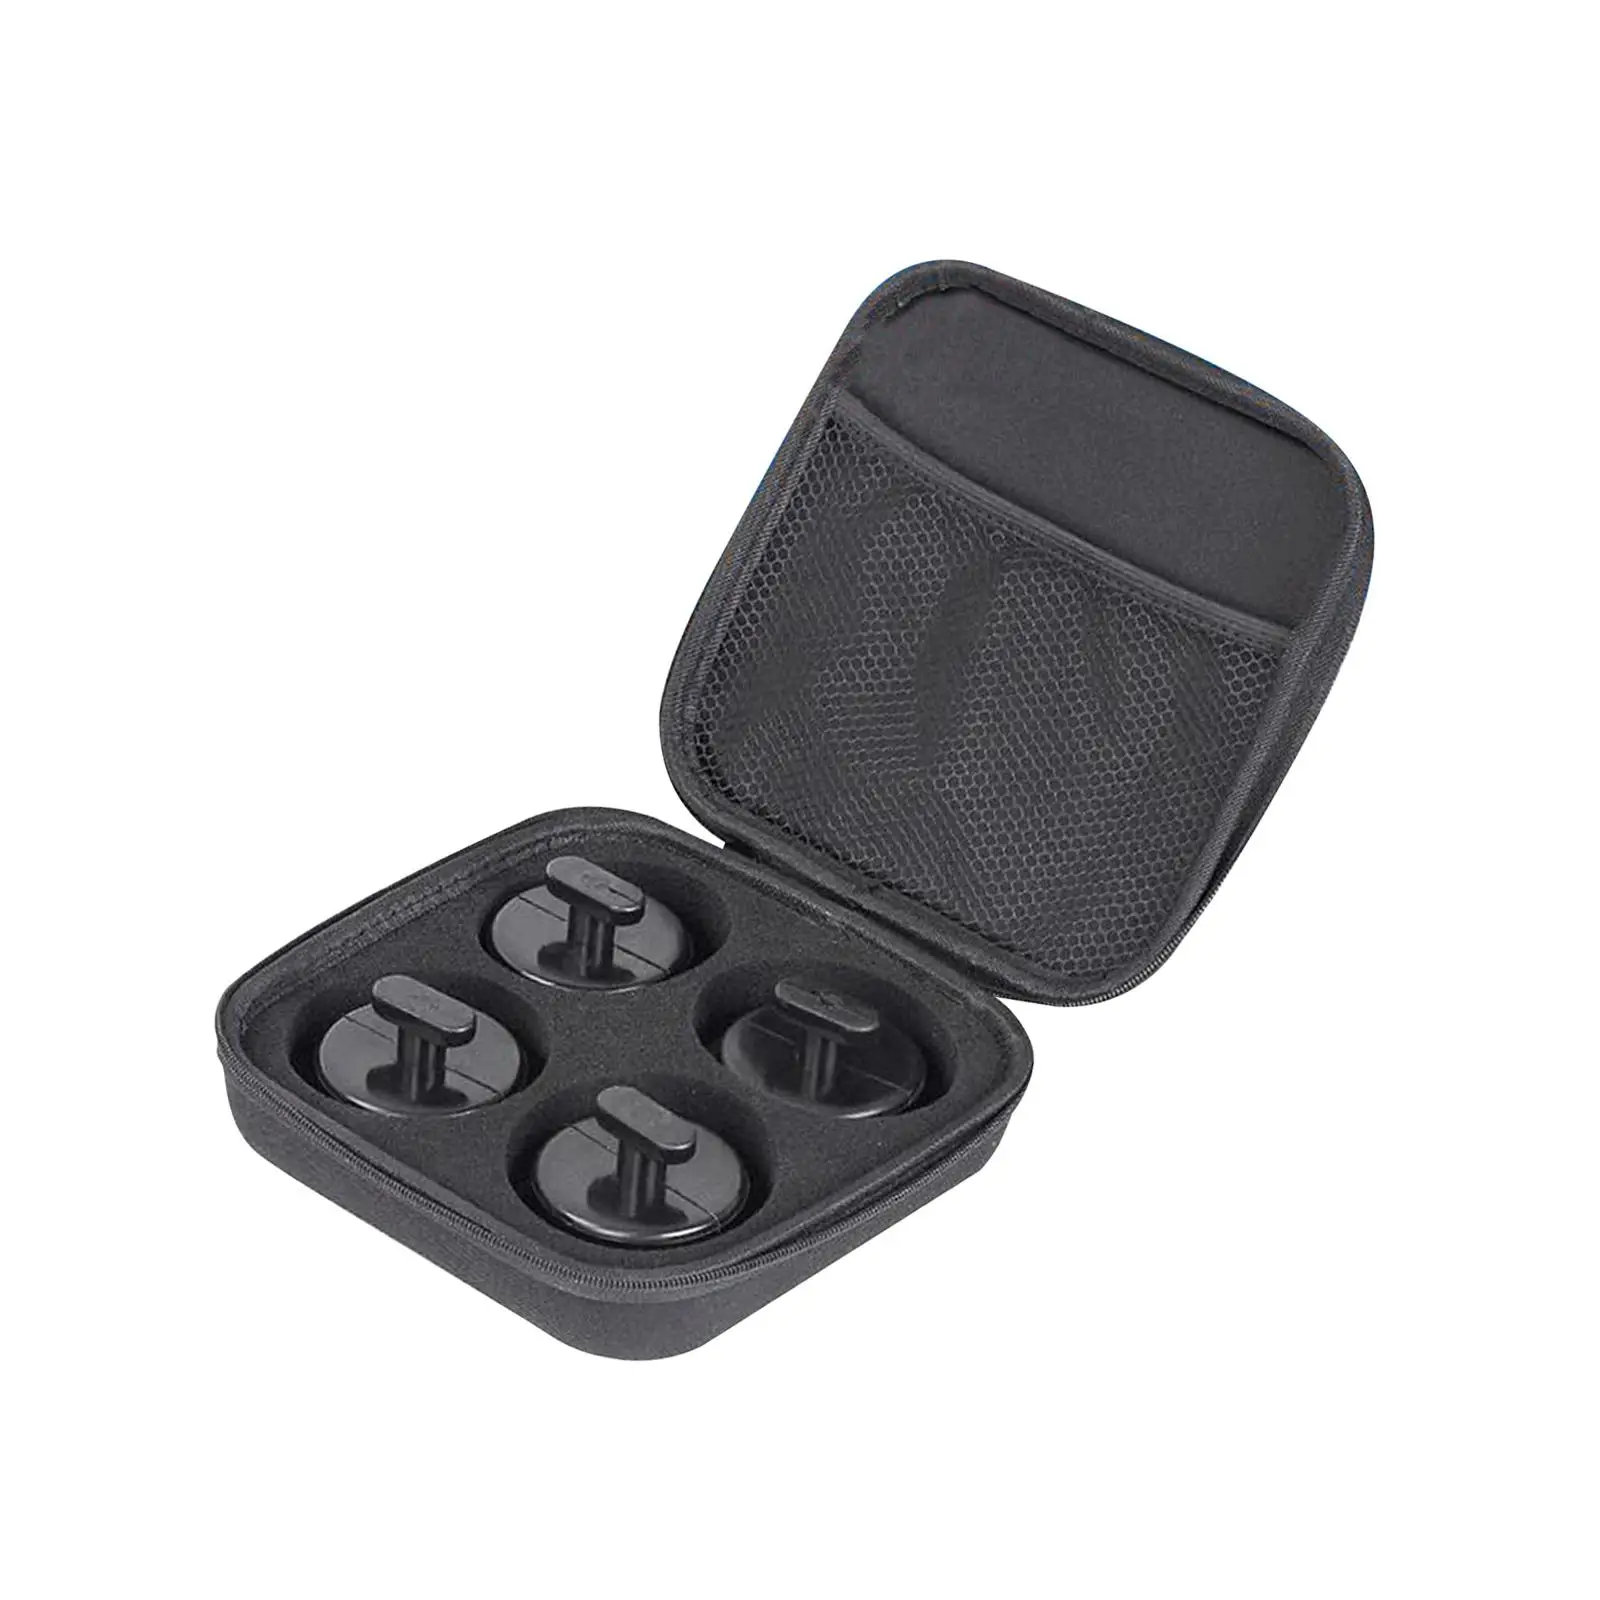 4 Pieces Jack Lifting Pads Easy Installation Jack Pads with Storage Box Durable for Corvette C5 C6 C7 Accessory Spare Parts